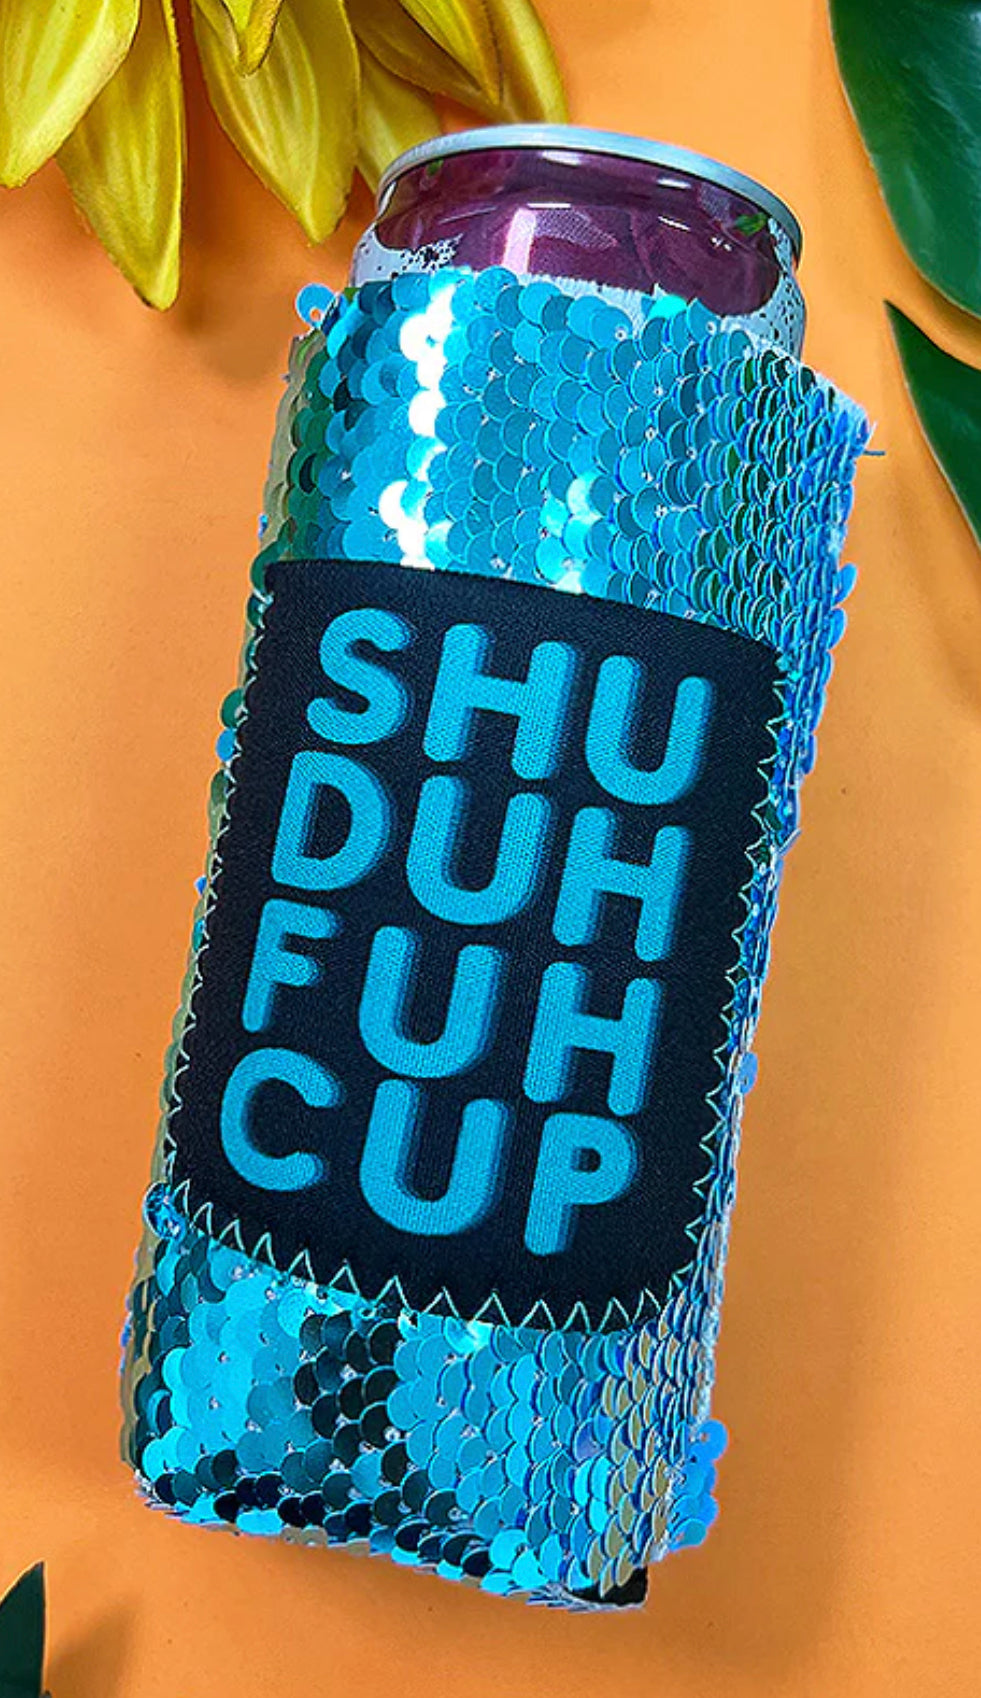 Shu Duh Fuh Cup Mint Sequin Slim Can Cooler